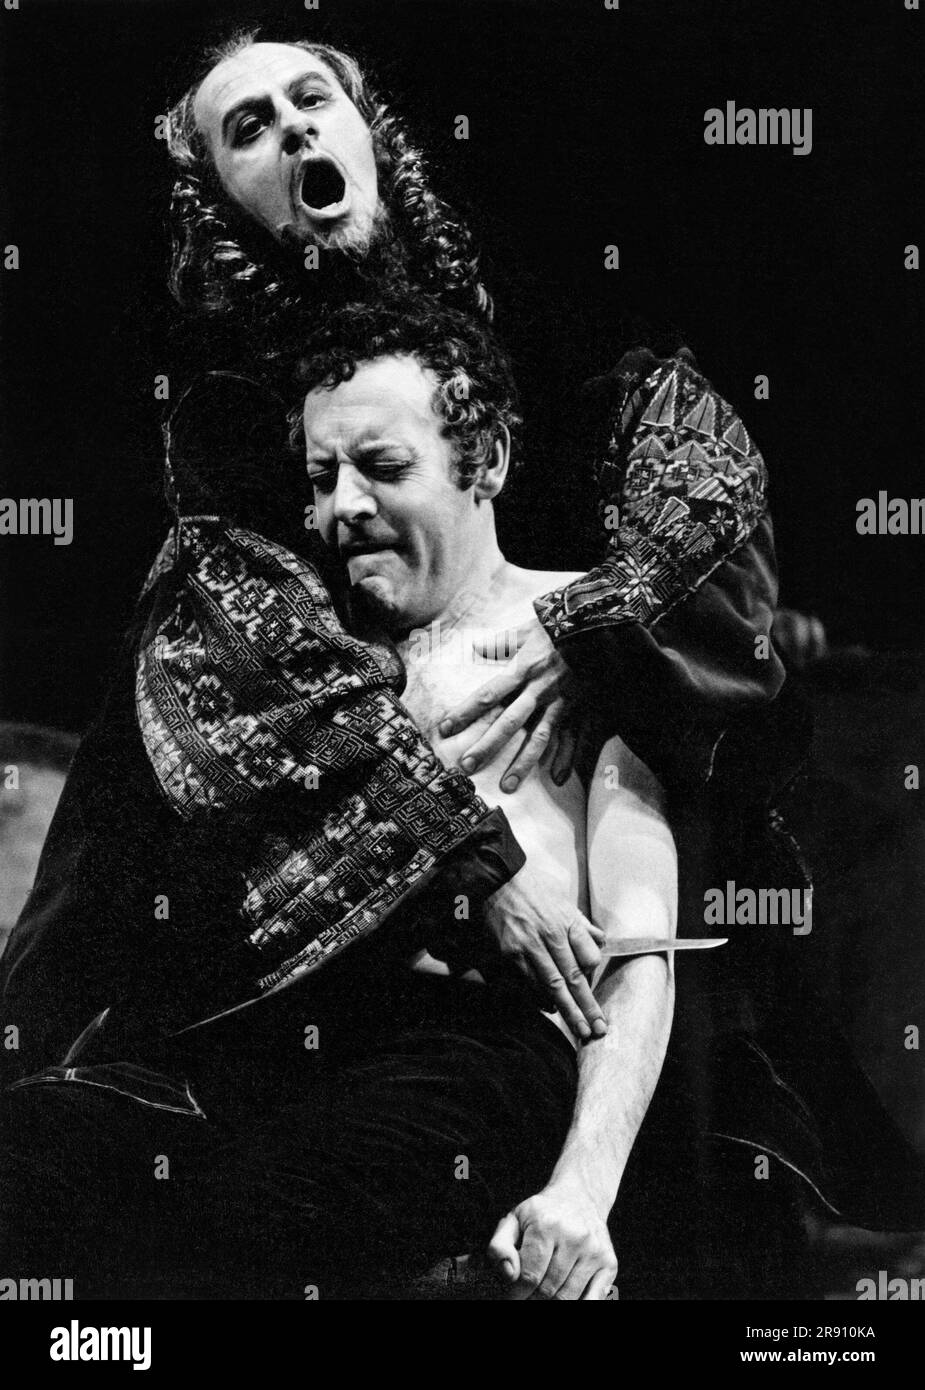 Emrys James (Shylock - rear), Tony Church (Antonio) in THE MERCHANT OF VENICE by Shakespeare at the Royal Shakespeare Company (RSC), Royal Shakespeare Theatre, Stratford-upon-Avon, England  30/03/1971  set design: Timothy O'Brien  costumes: Tazeena Firth & Timothy O'Brien  lighting: John Bradley  director: Terry Hands Stock Photo